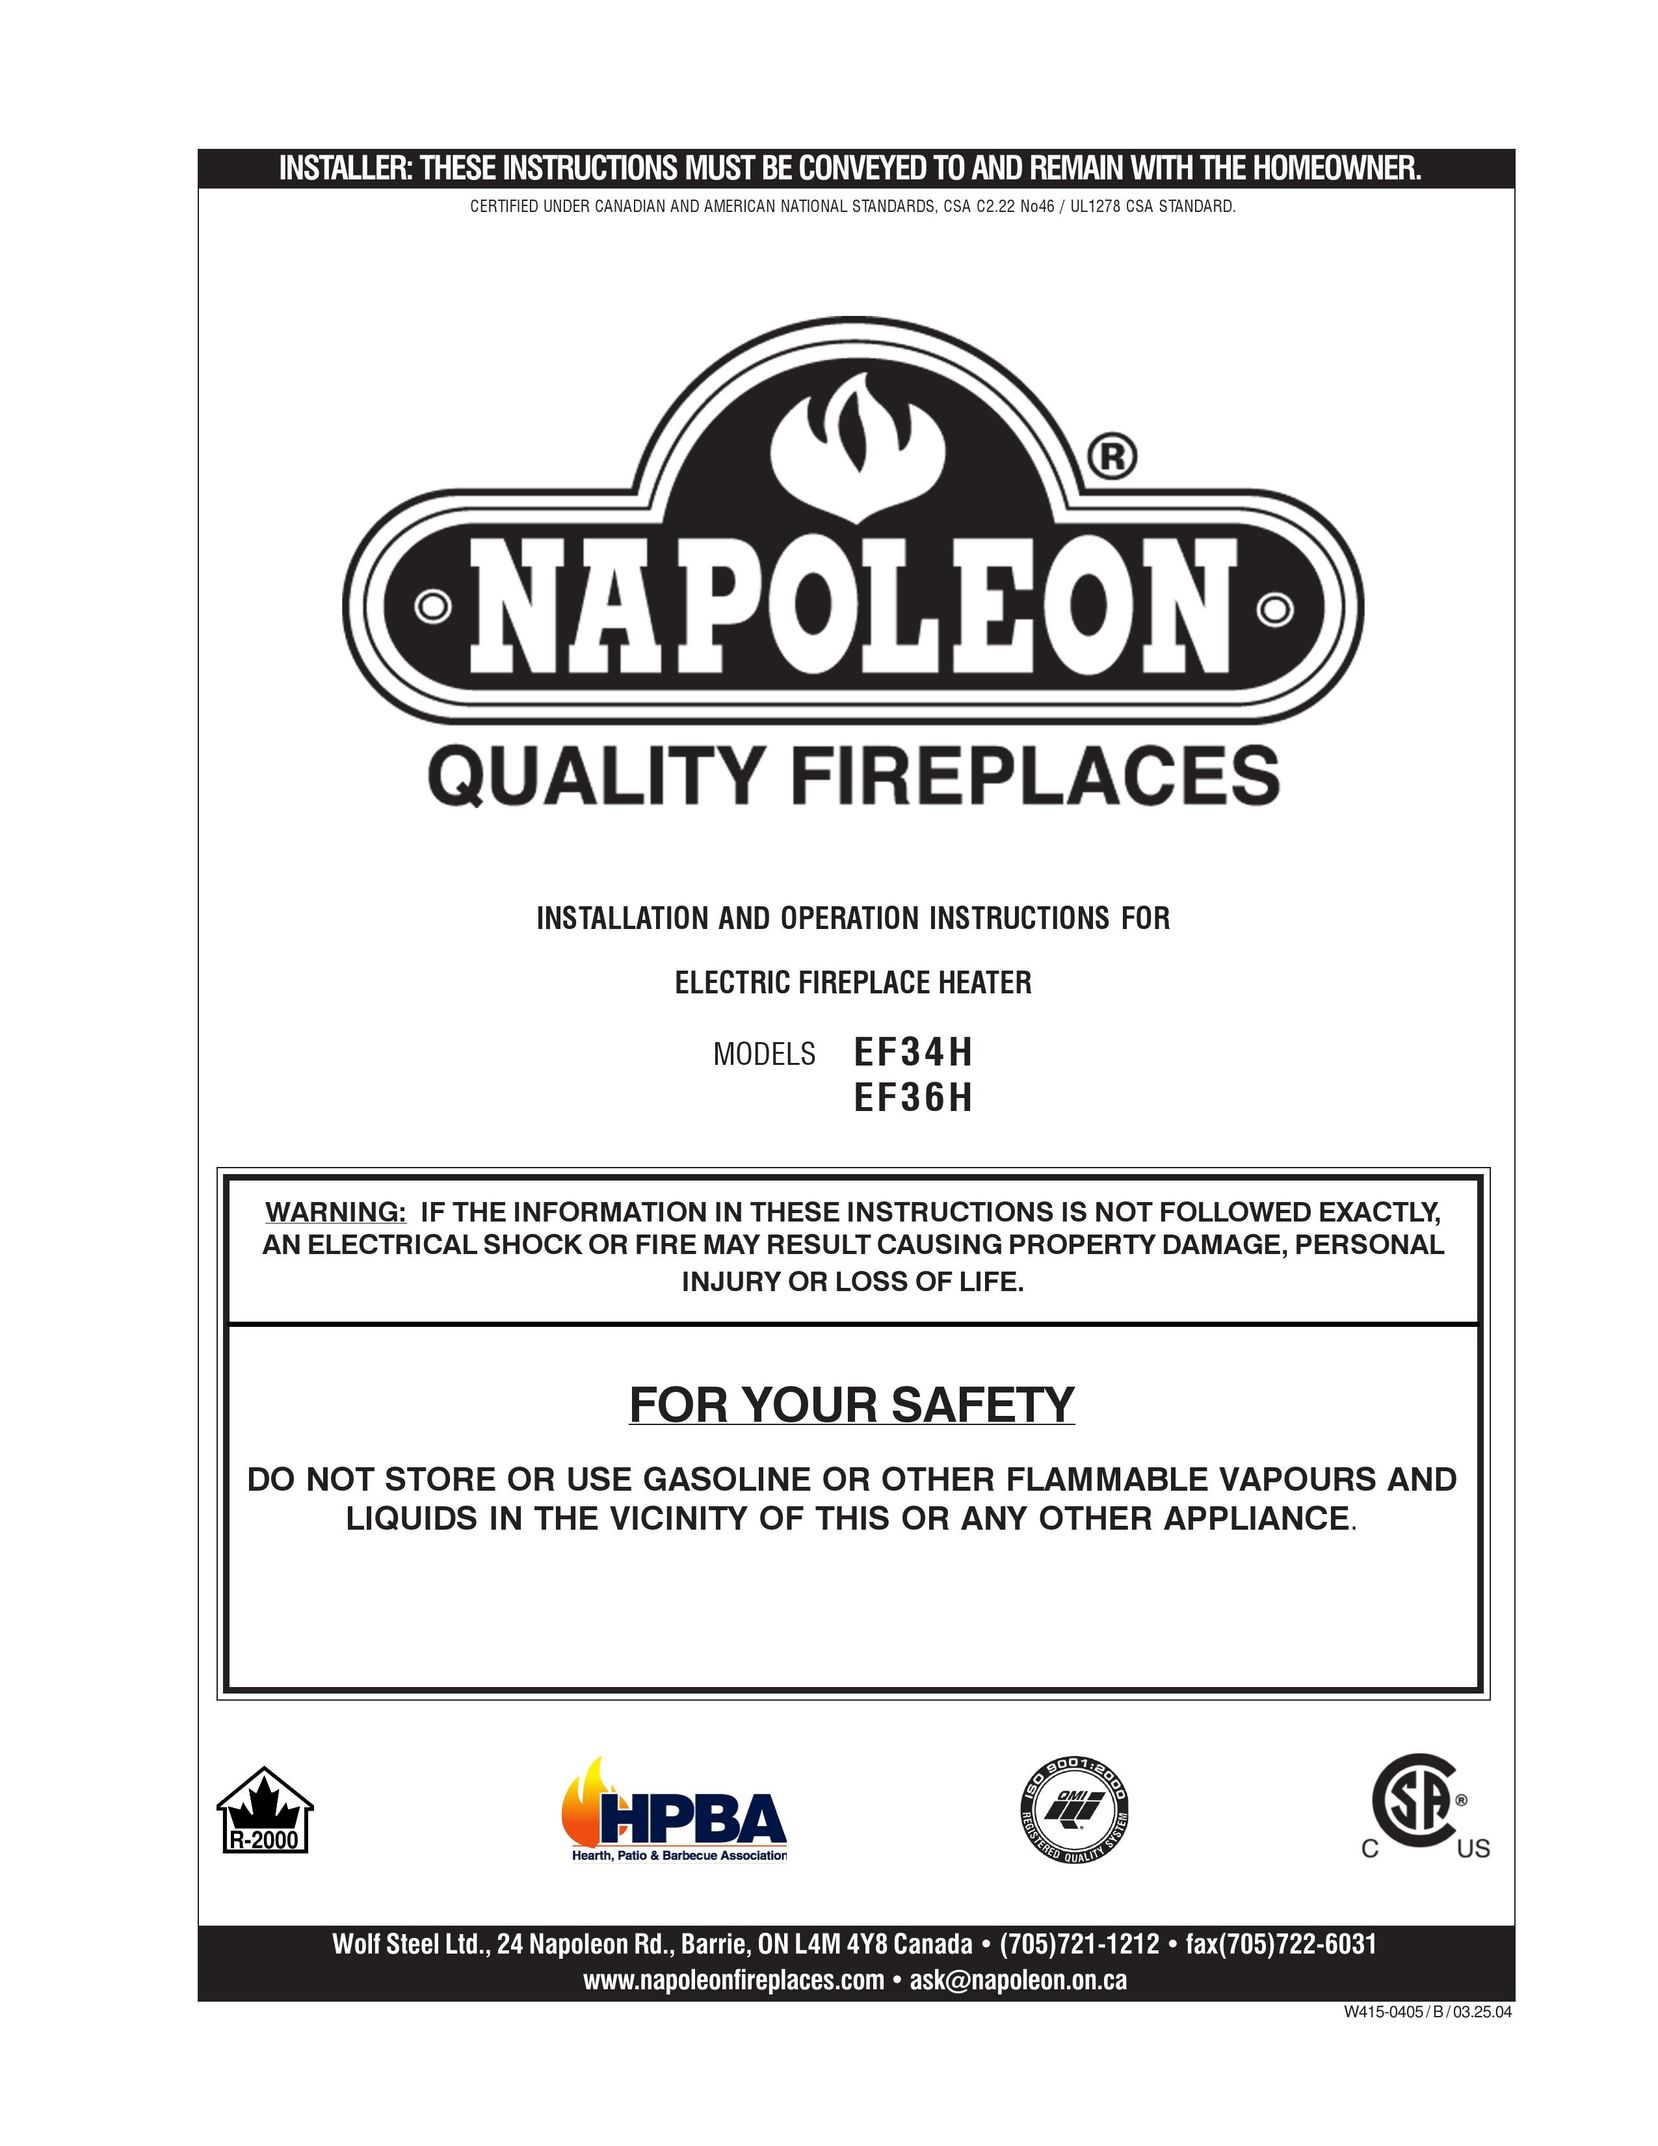 Napoleon Fireplaces EF34H Indoor Fireplace User Manual